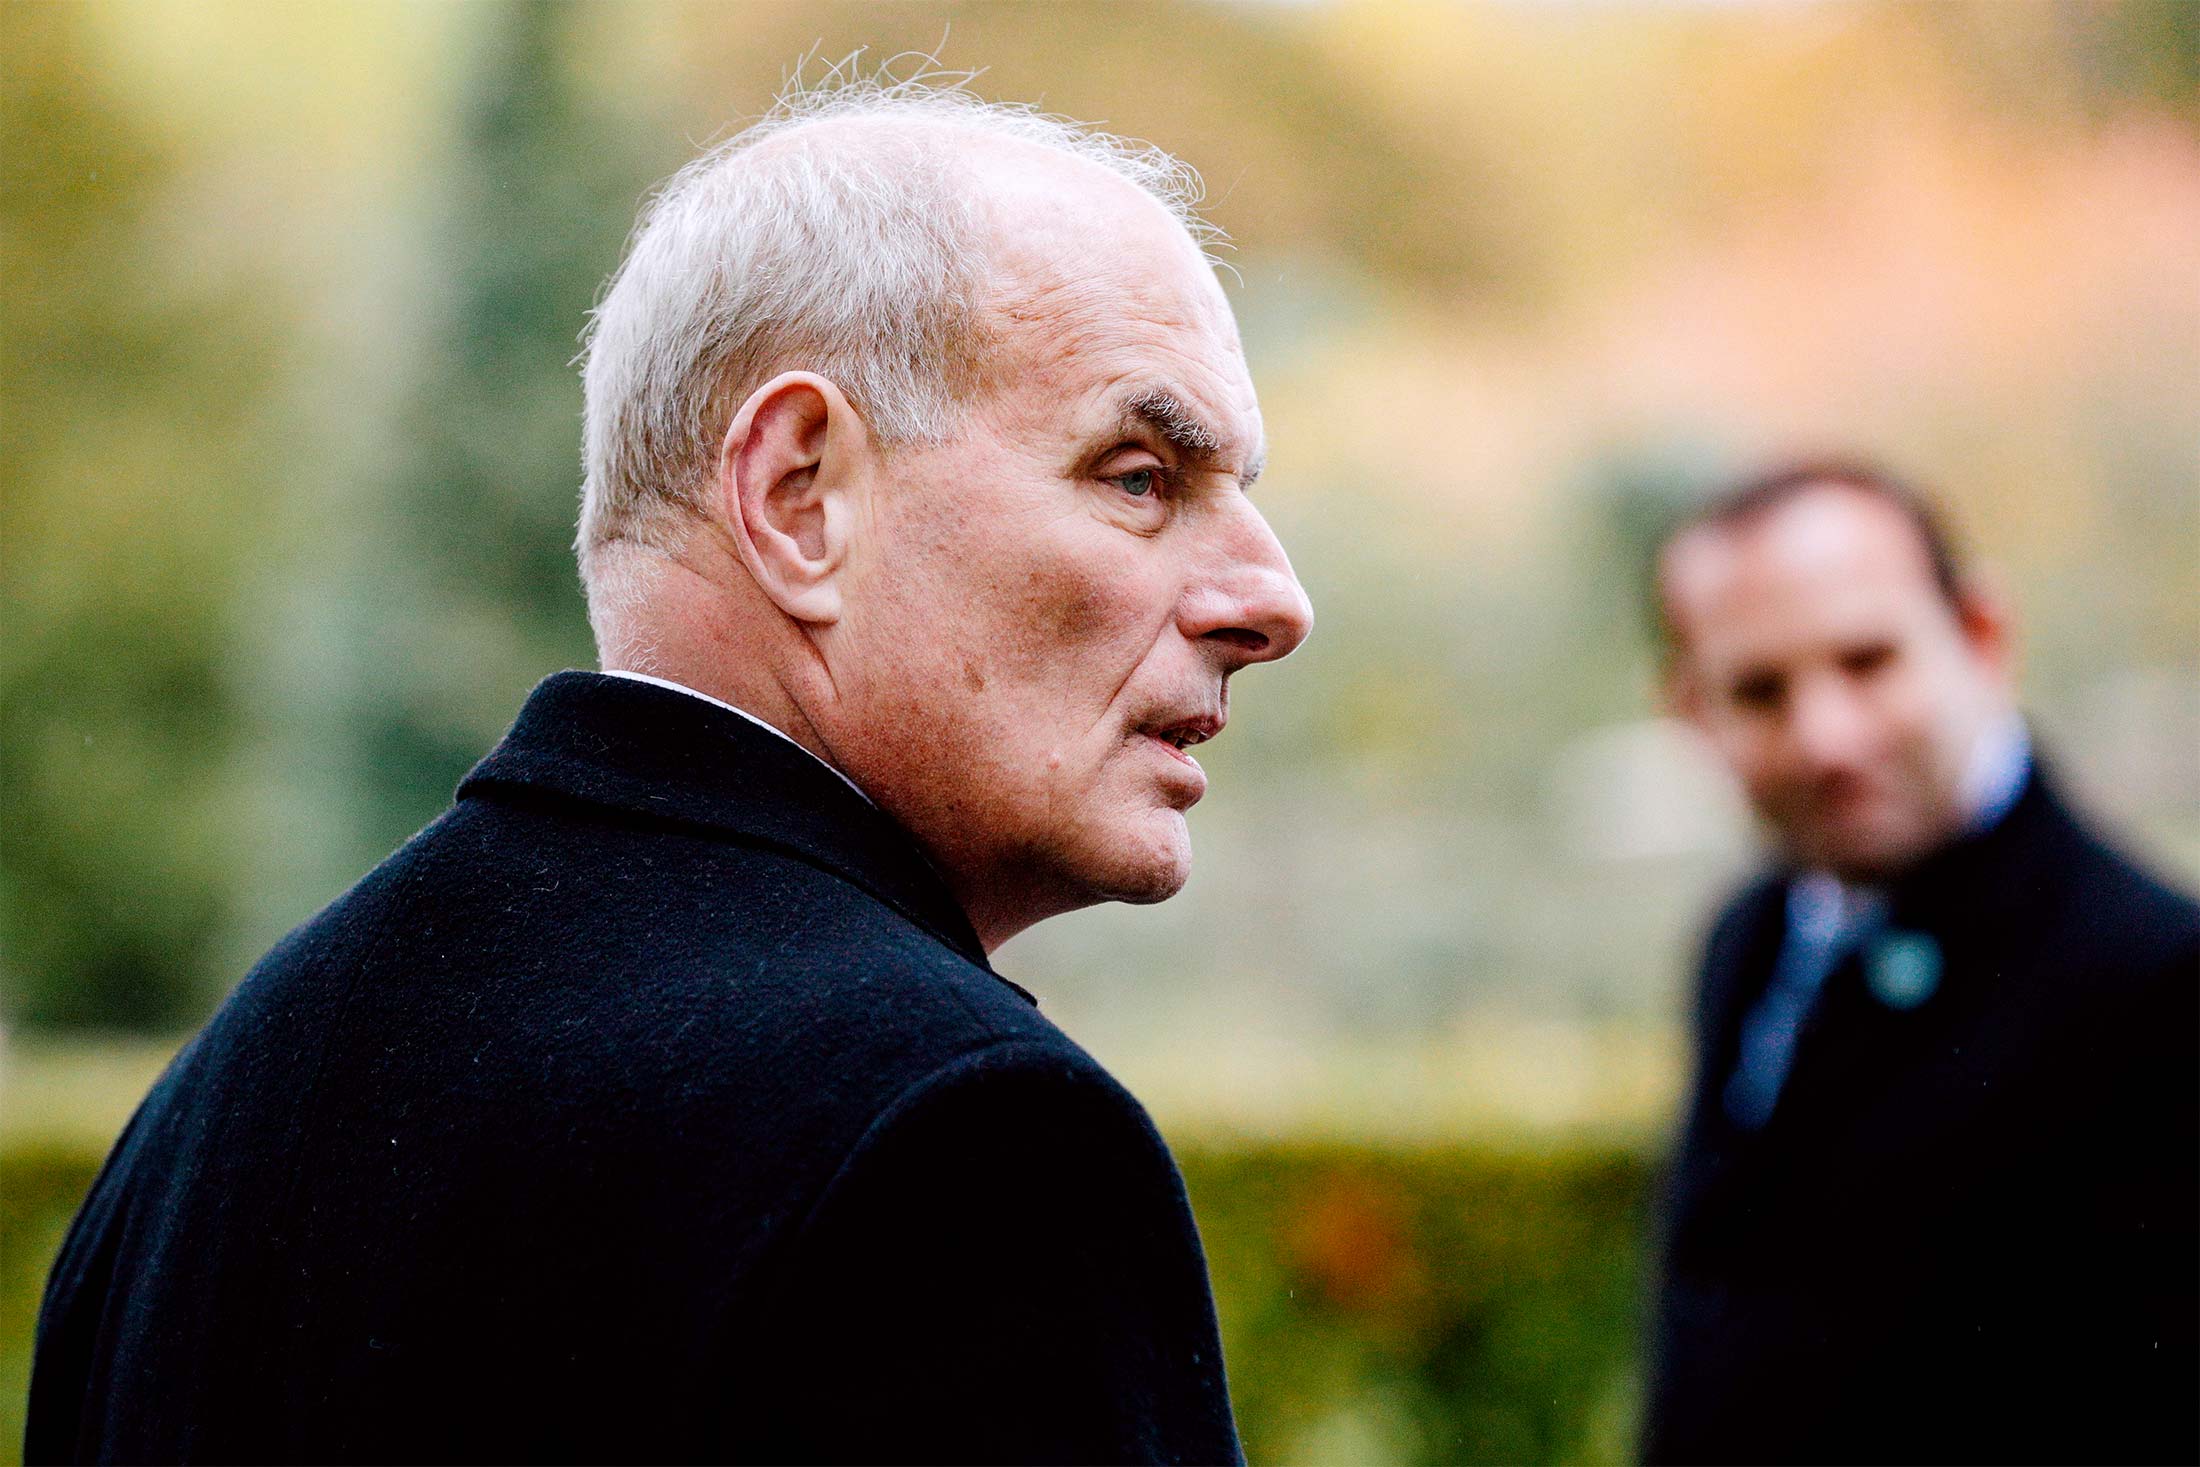 John F Kelly visits the Aisne-Marne American Cemetery and Memorial in Belleau, France, on Nov. 10.